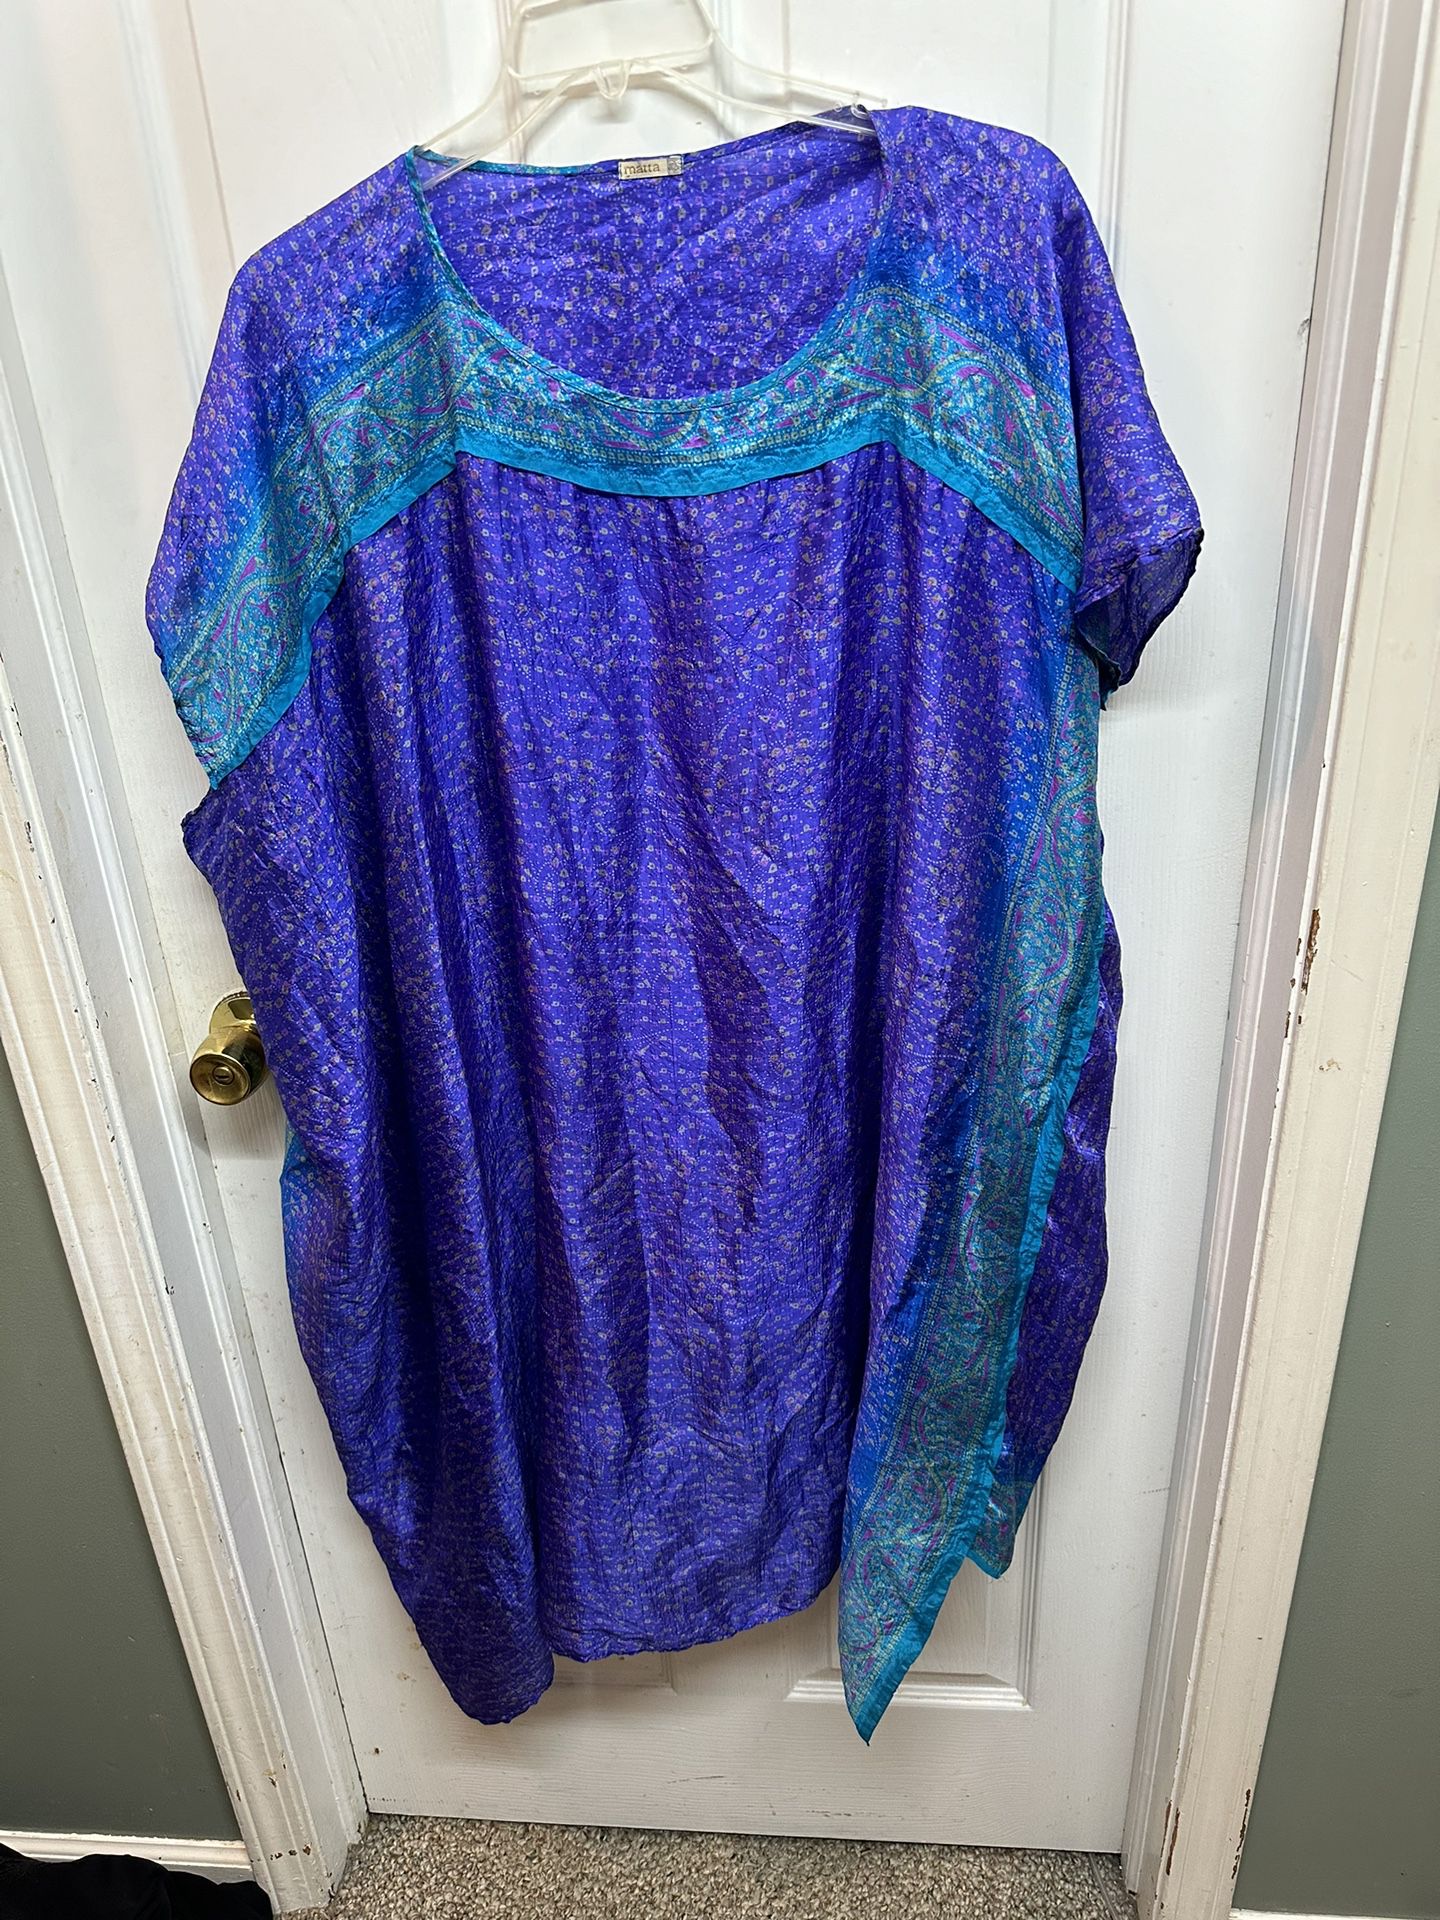 Matta Jewel Tone Colors One Size Fits All 100% Silk Kaftan Tunic Dress Made In India Great Condition 